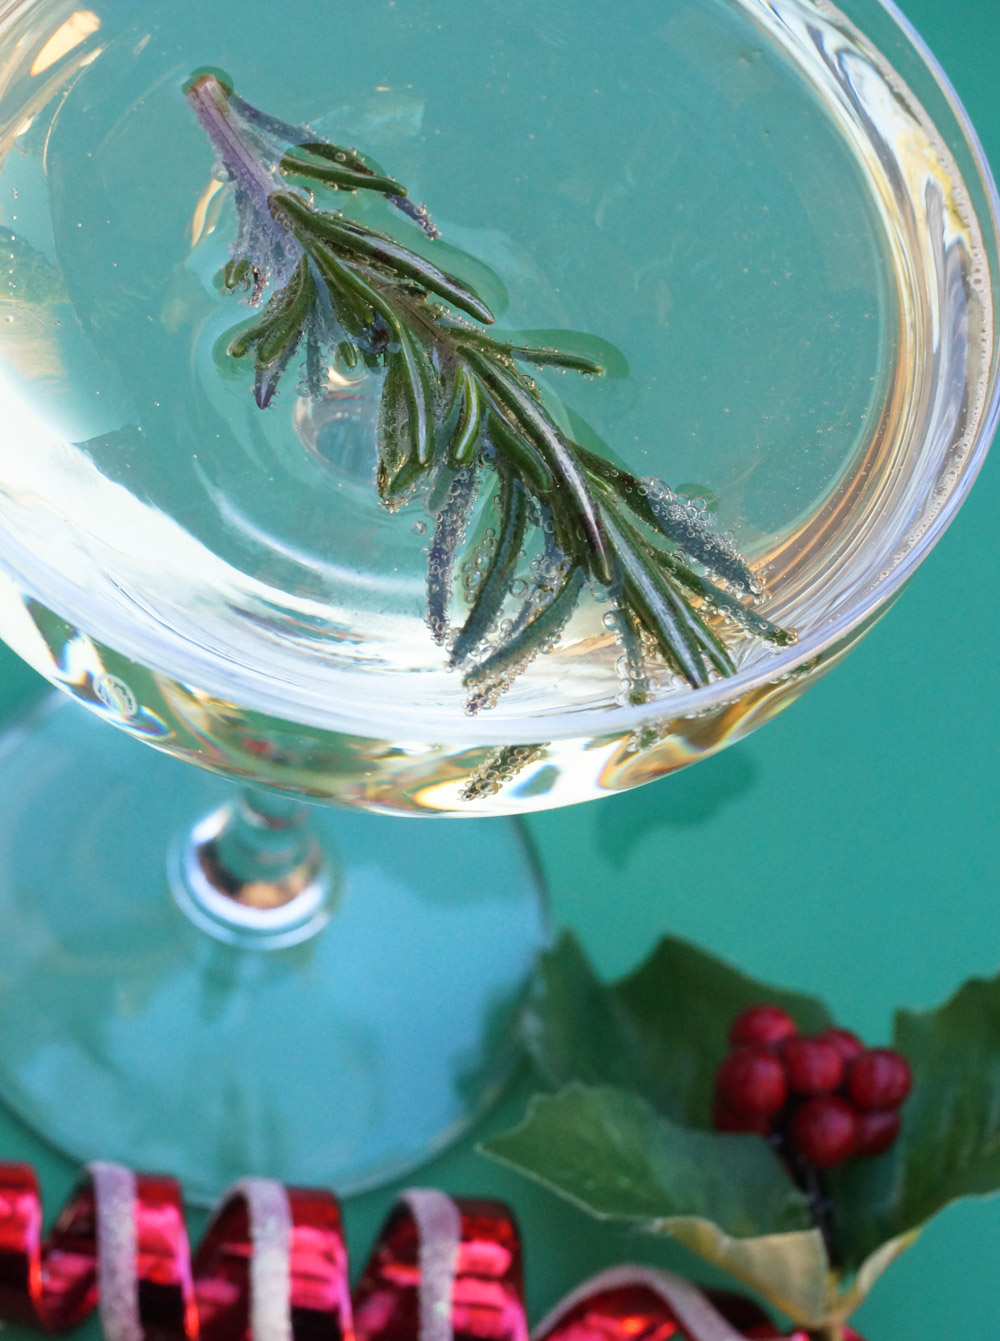 Rosemary adds a festive holiday touch to cocktails